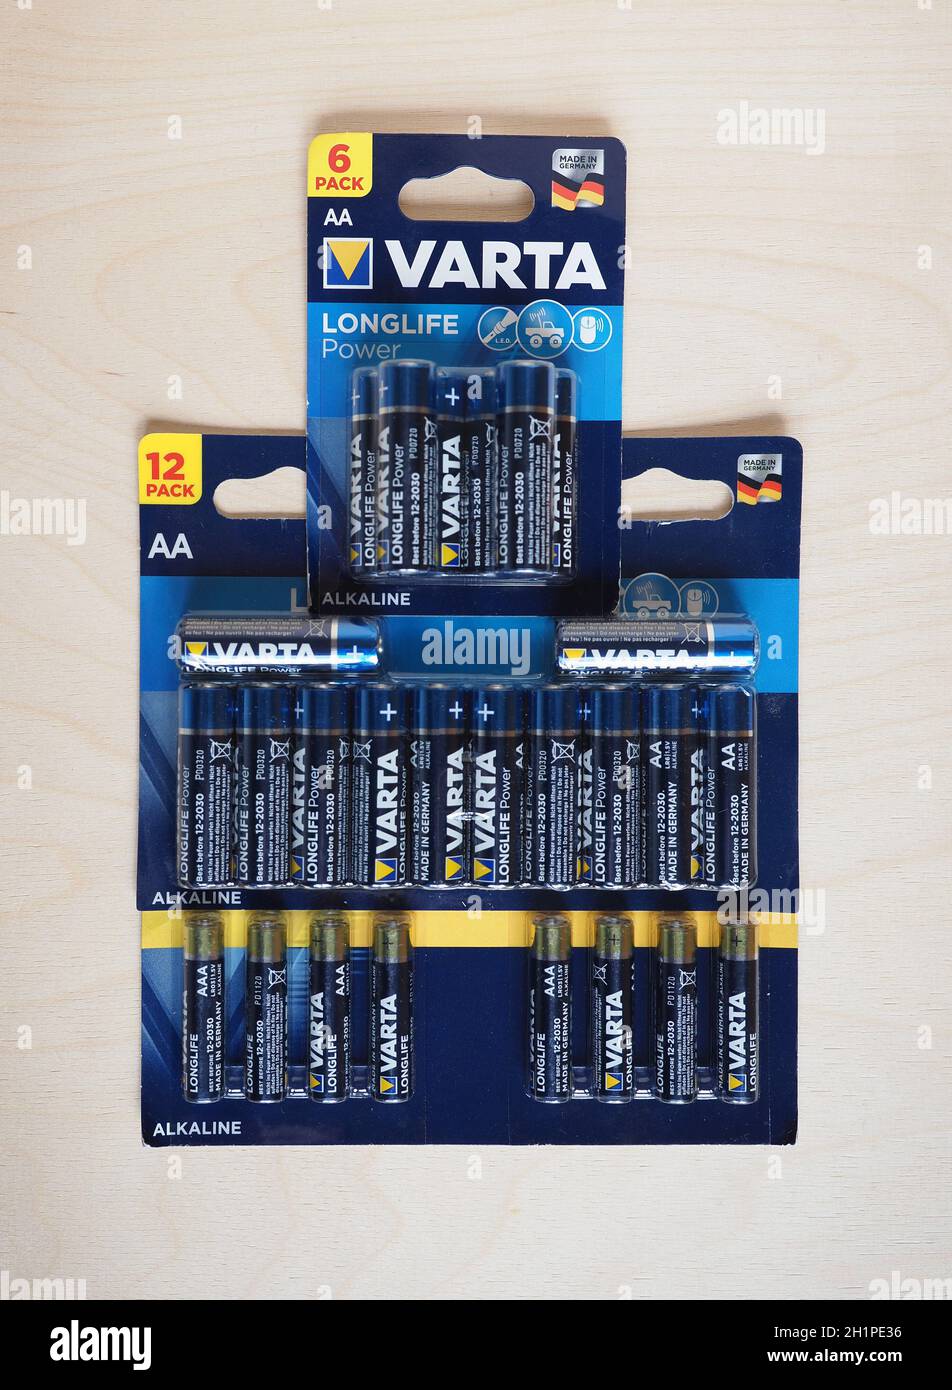 Varta German Batteries High Resolution Stock Photography and Images - Alamy